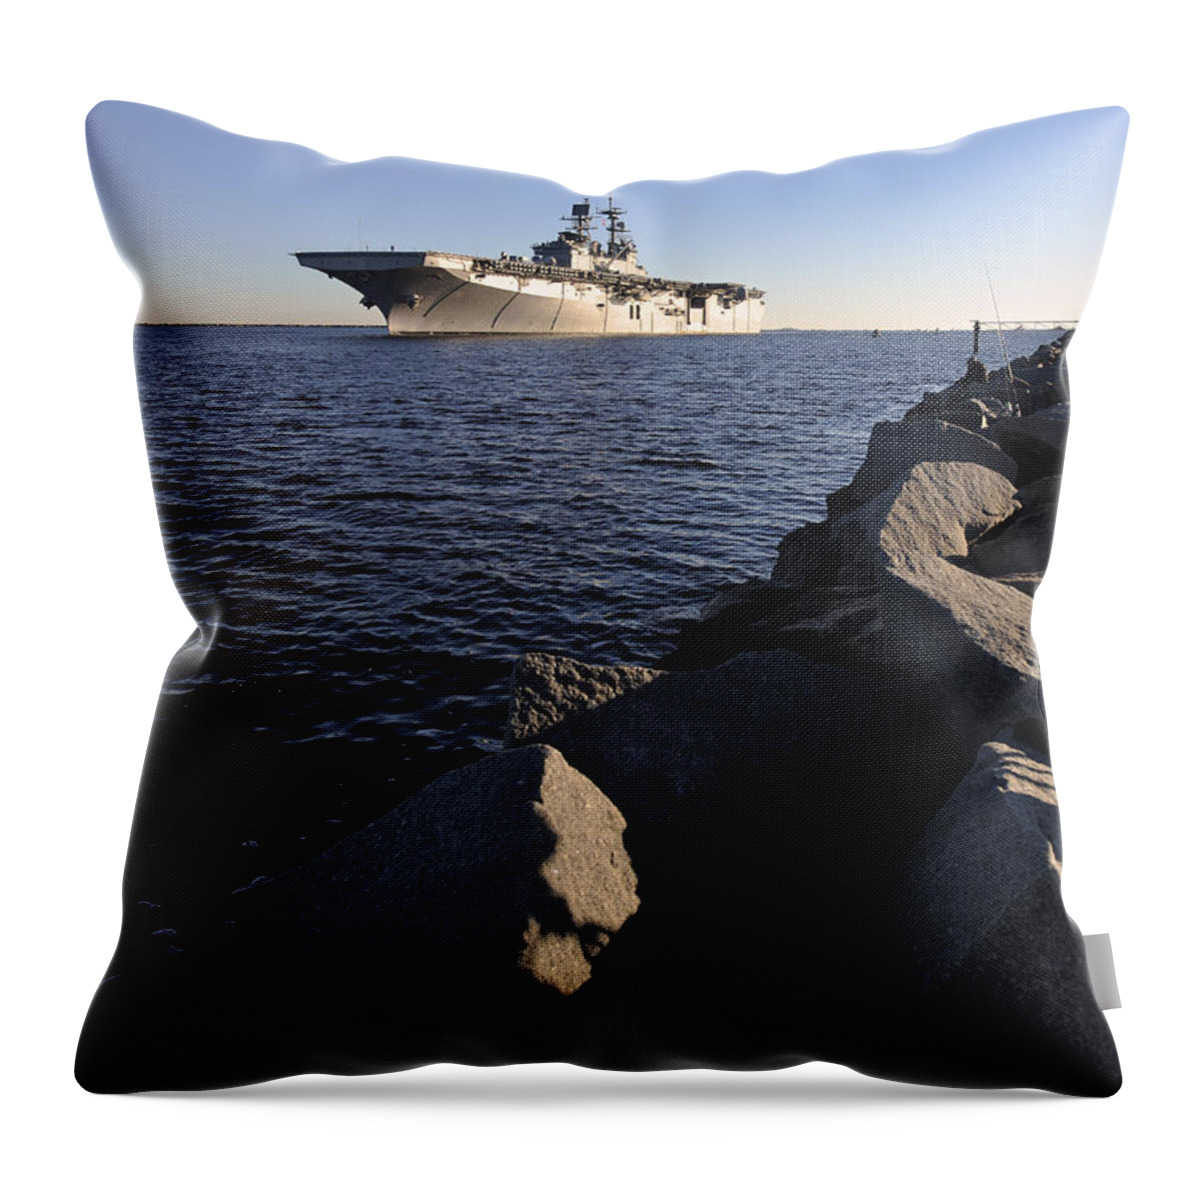 Navy Throw Pillow featuring the photograph Uss Bataan Arrives At Naval Station #2 by Stocktrek Images